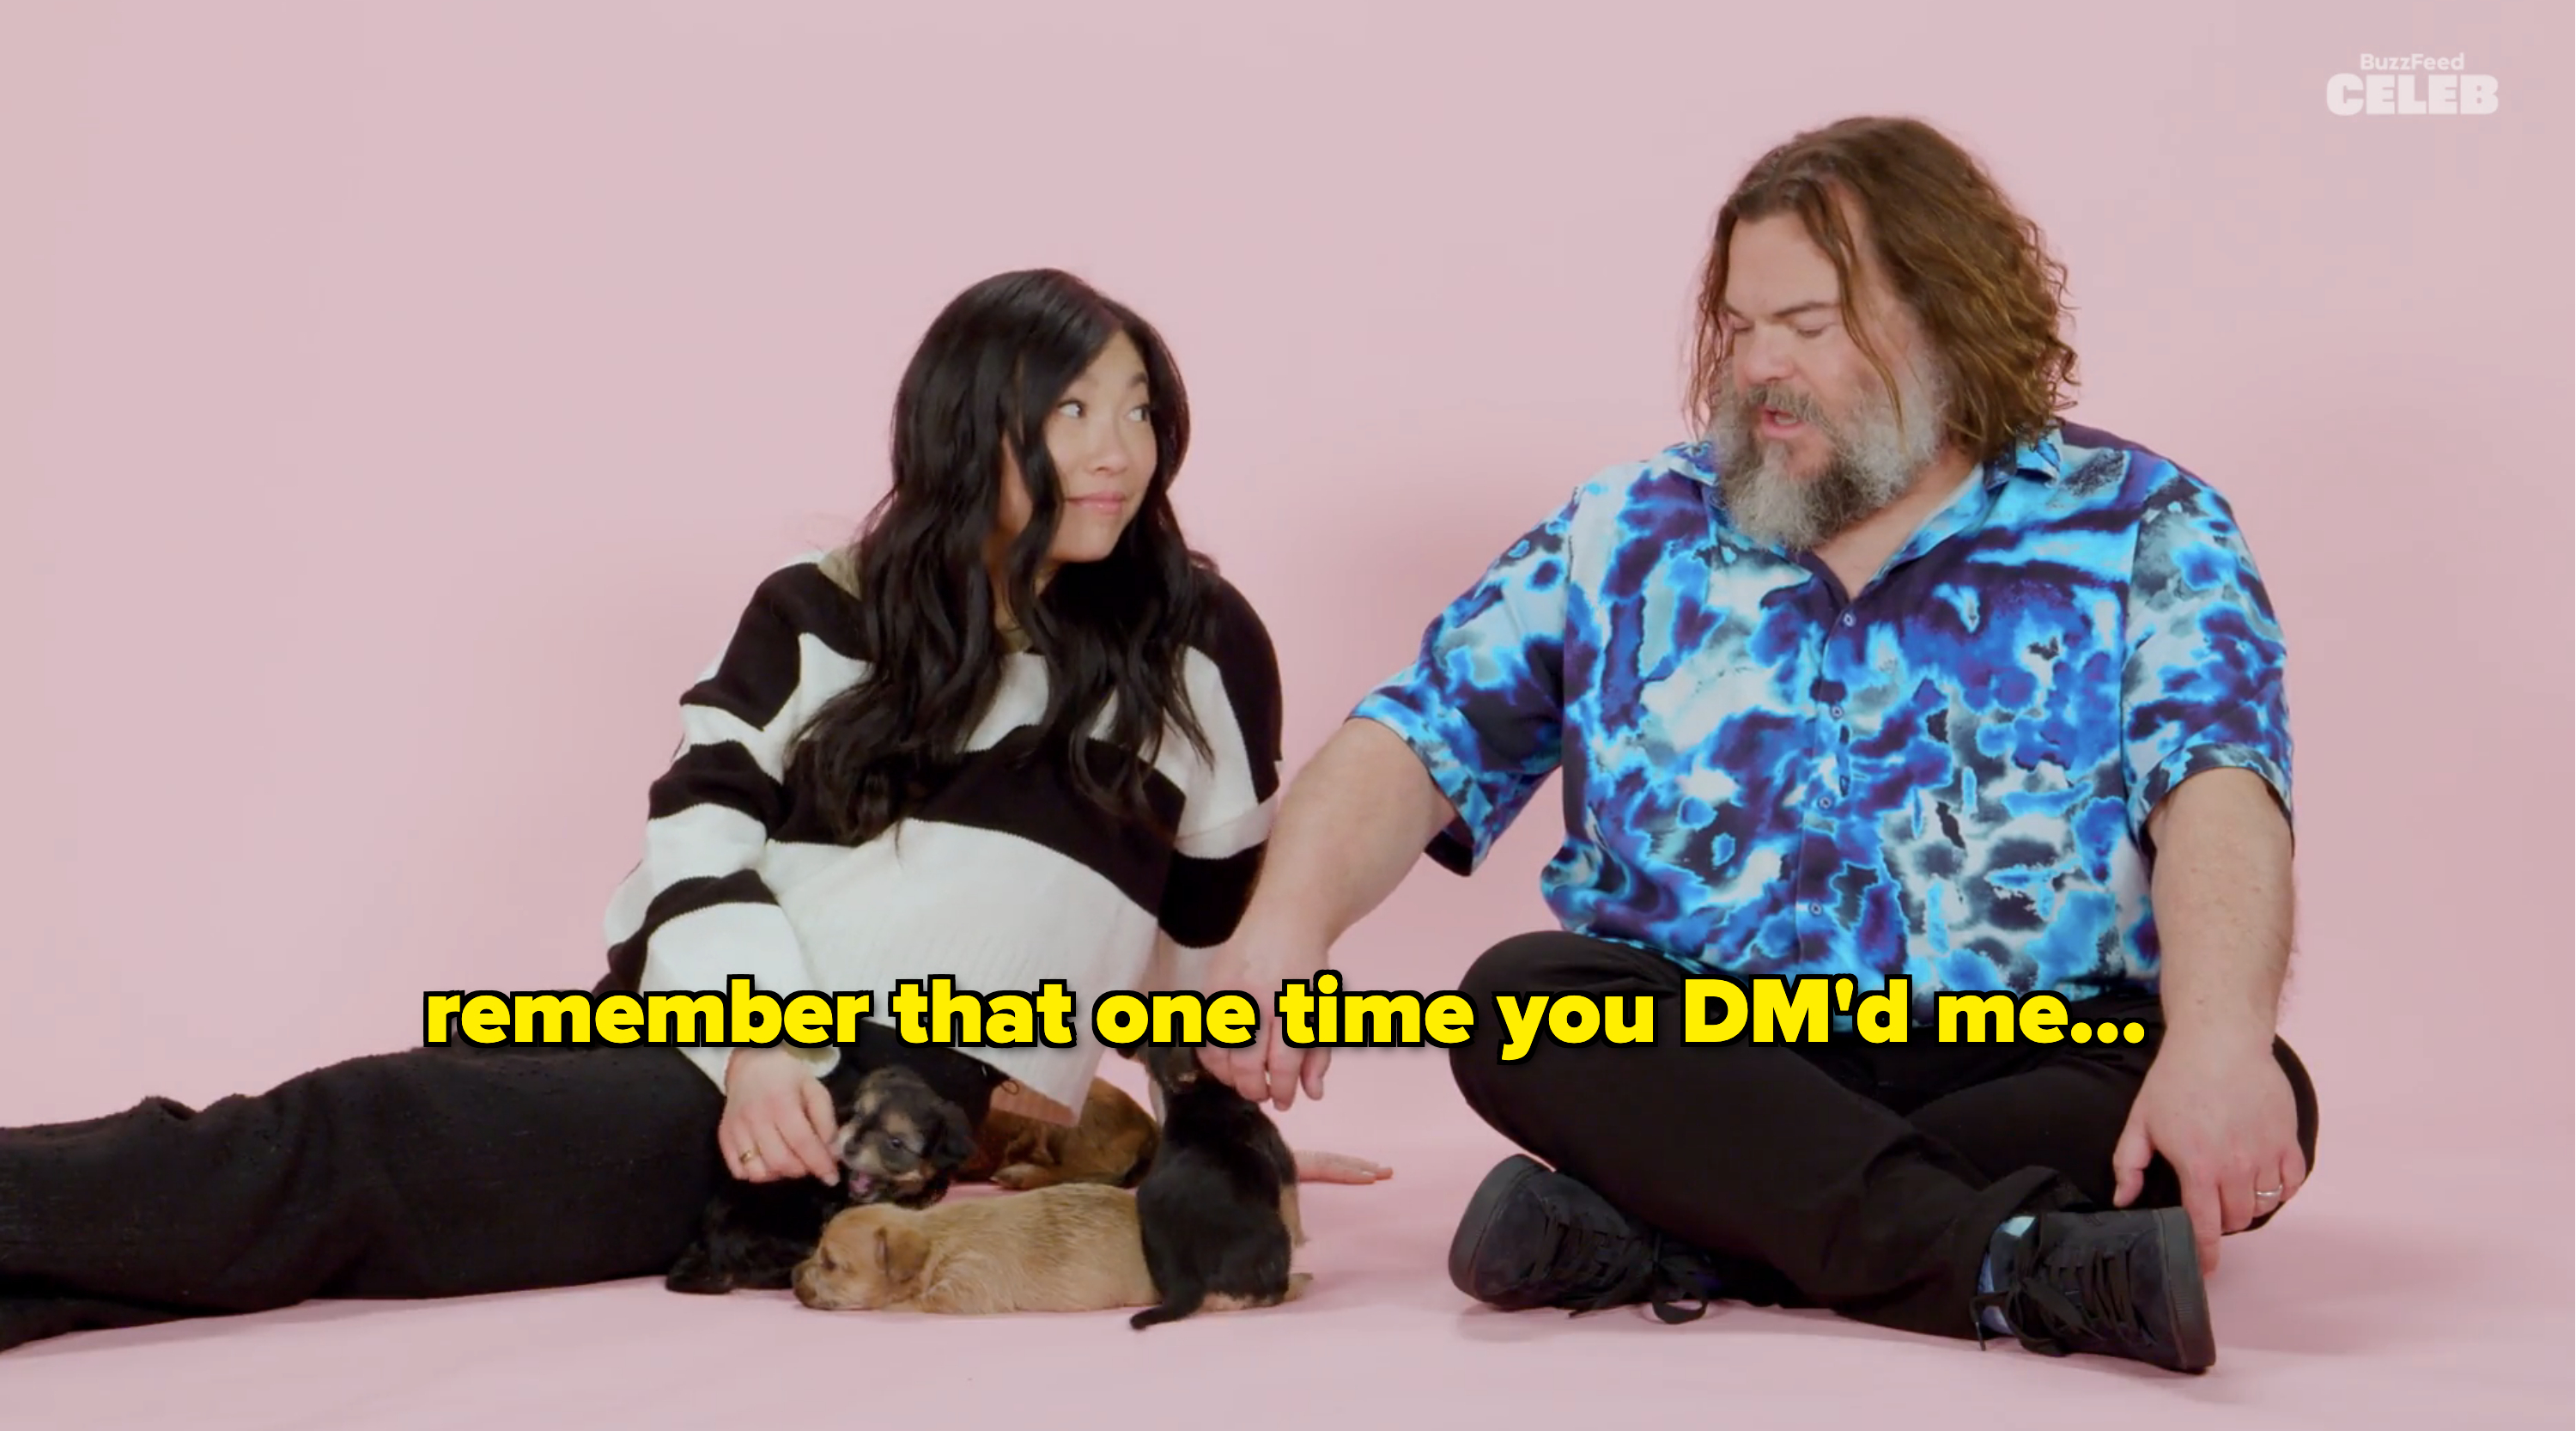 Awkwafina and Jack Black sitting on the floor with puppies